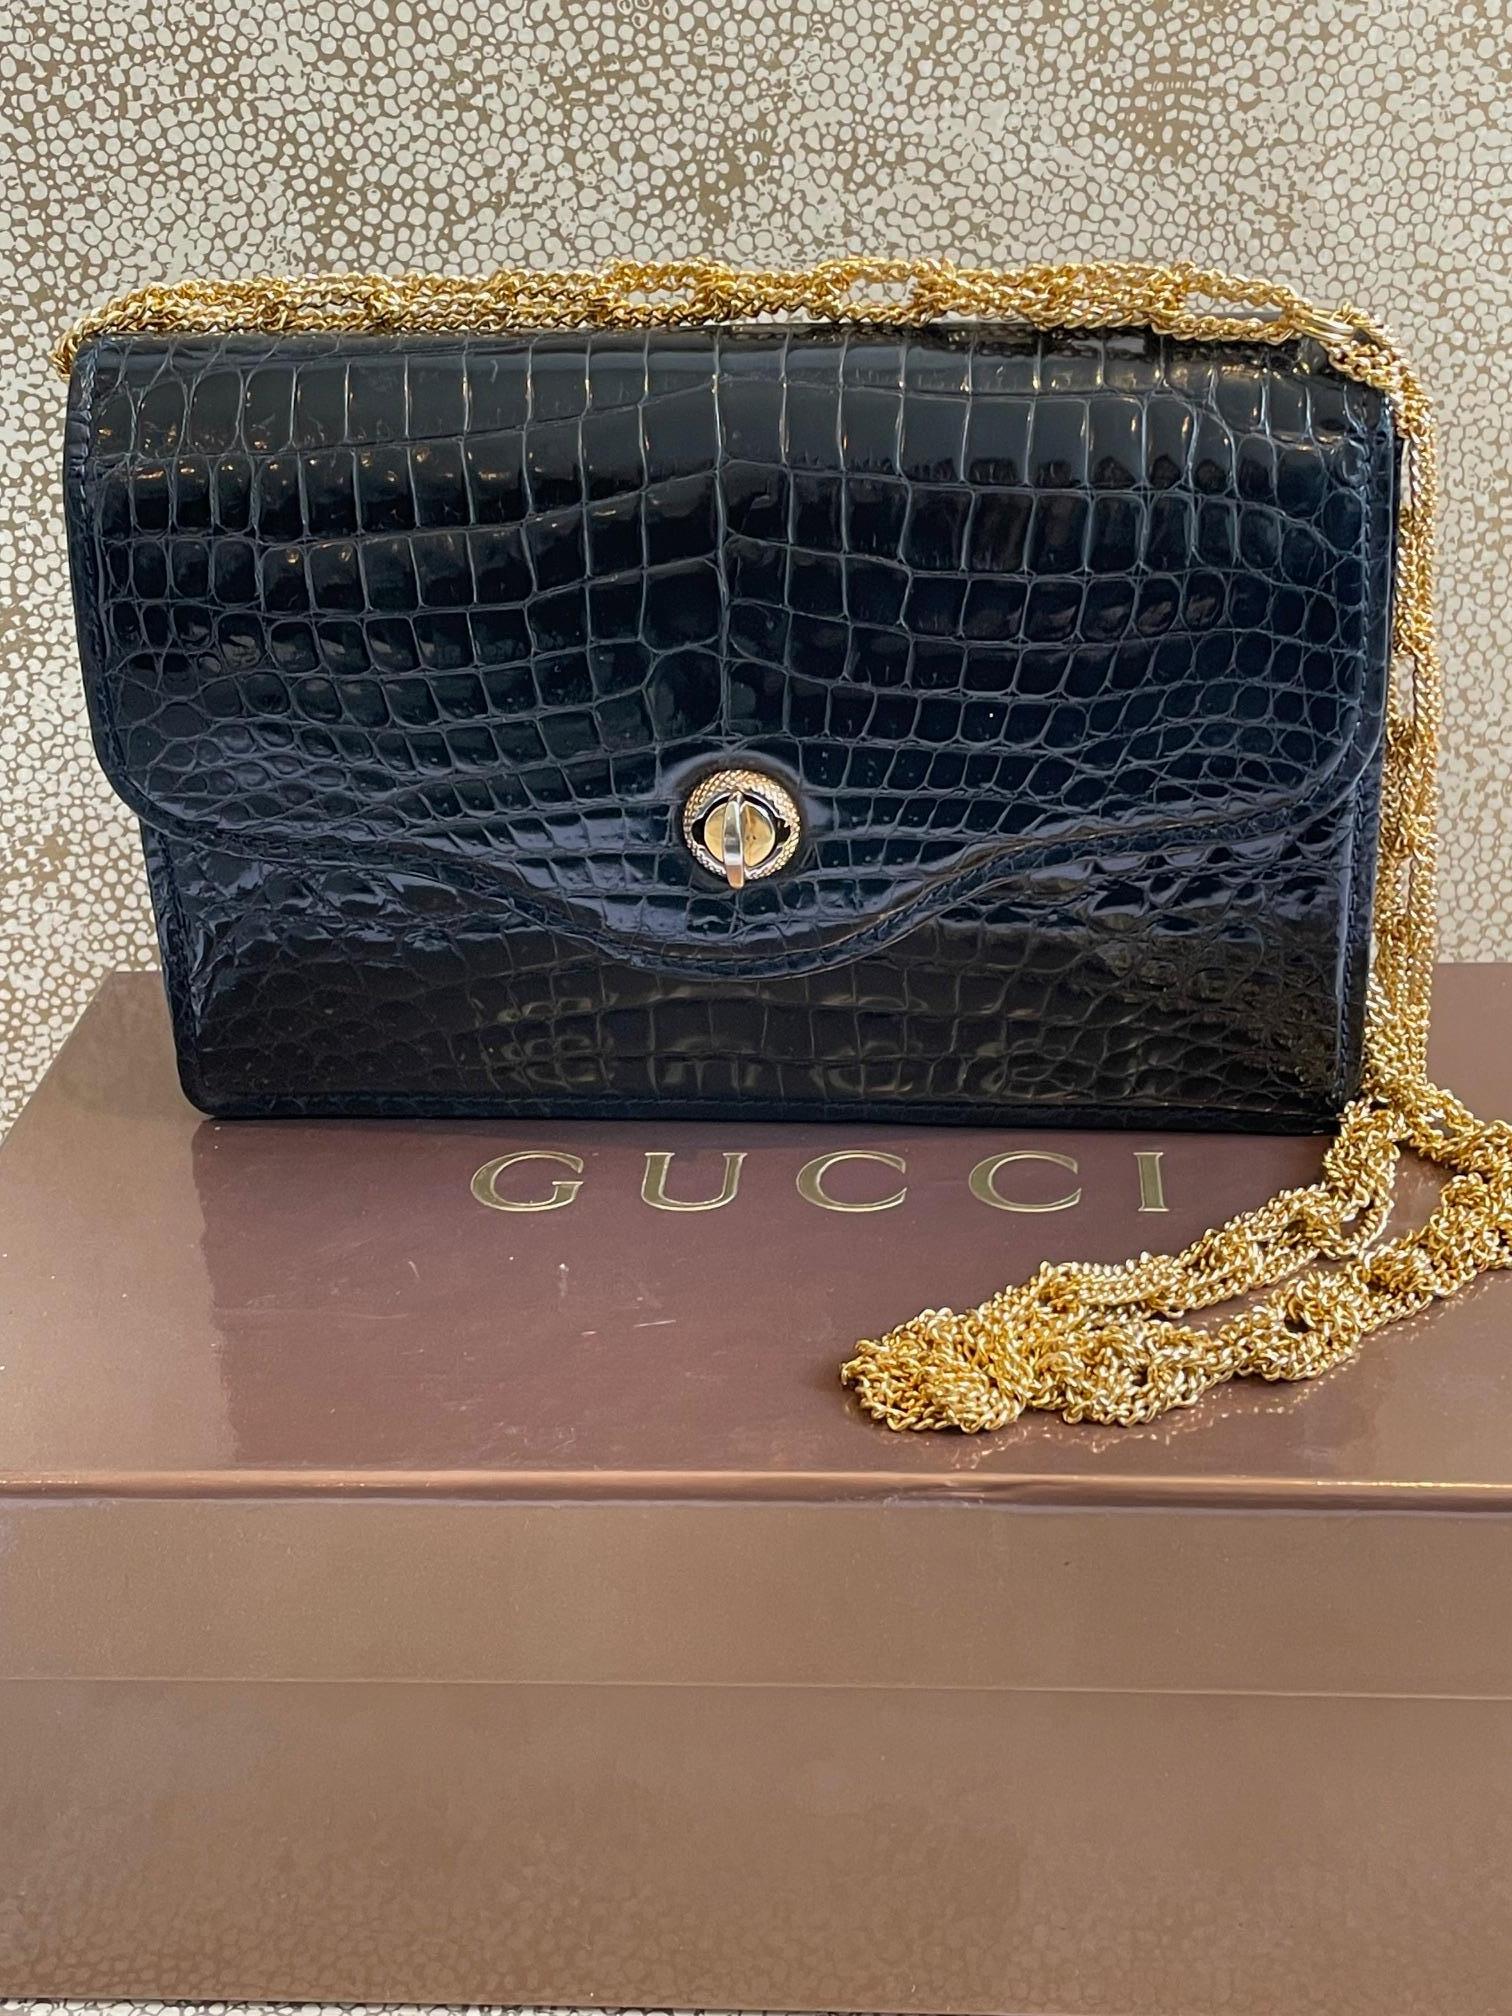 Gucci Crocodile Chain And Turn Lock Clutch  1960s. 

A stunning, very rare vintage Gucci crocodile Porosus clutch bag. It is a very dark navy blue bag (almost black) with navy stitching. It is a flap bag with a gold tone turn lock. The interior is